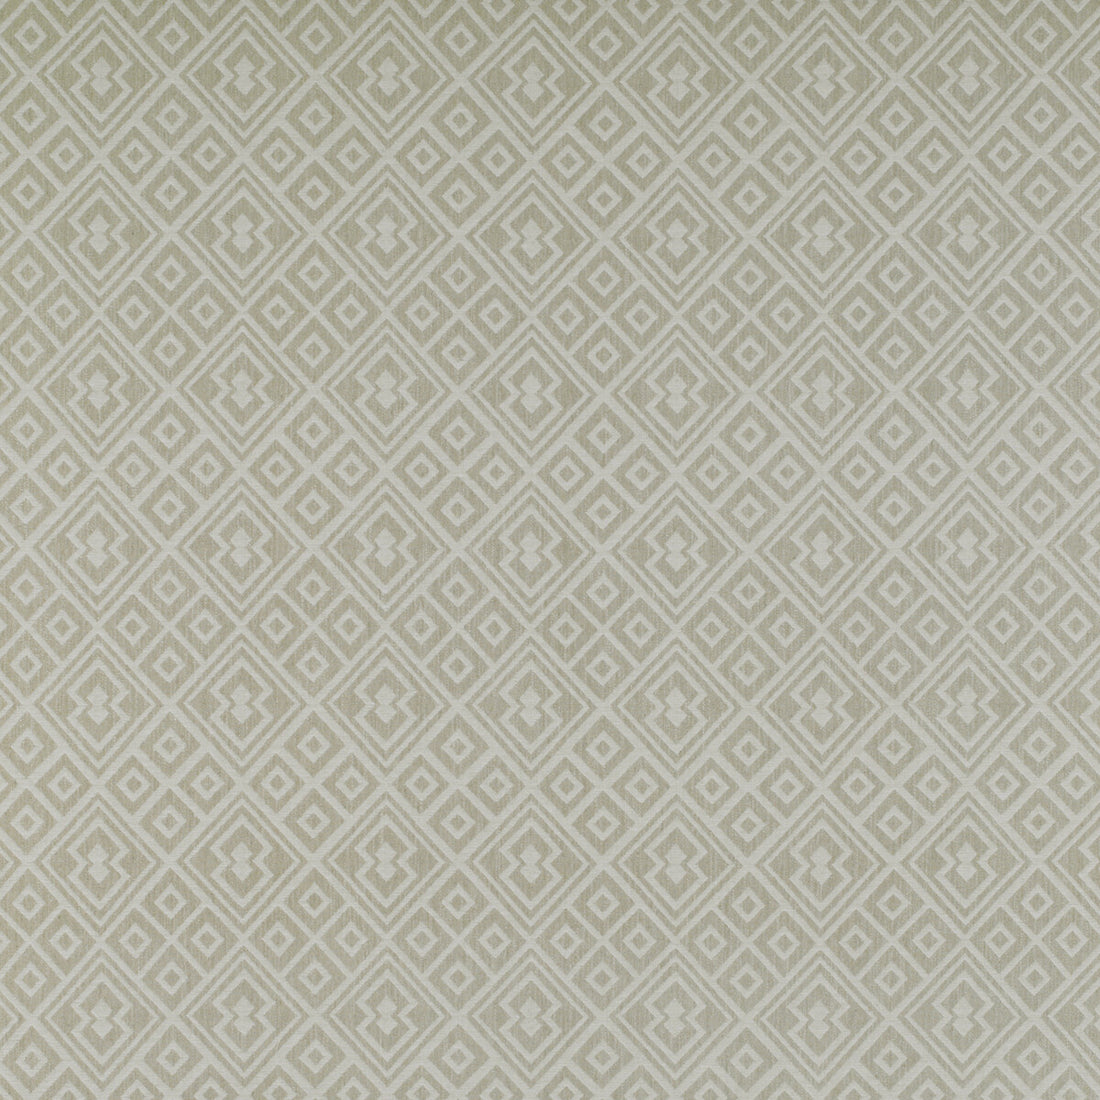 Bergamo fabric in blanco color - pattern GDT5325.003.0 - by Gaston y Daniela in the Tierras collection